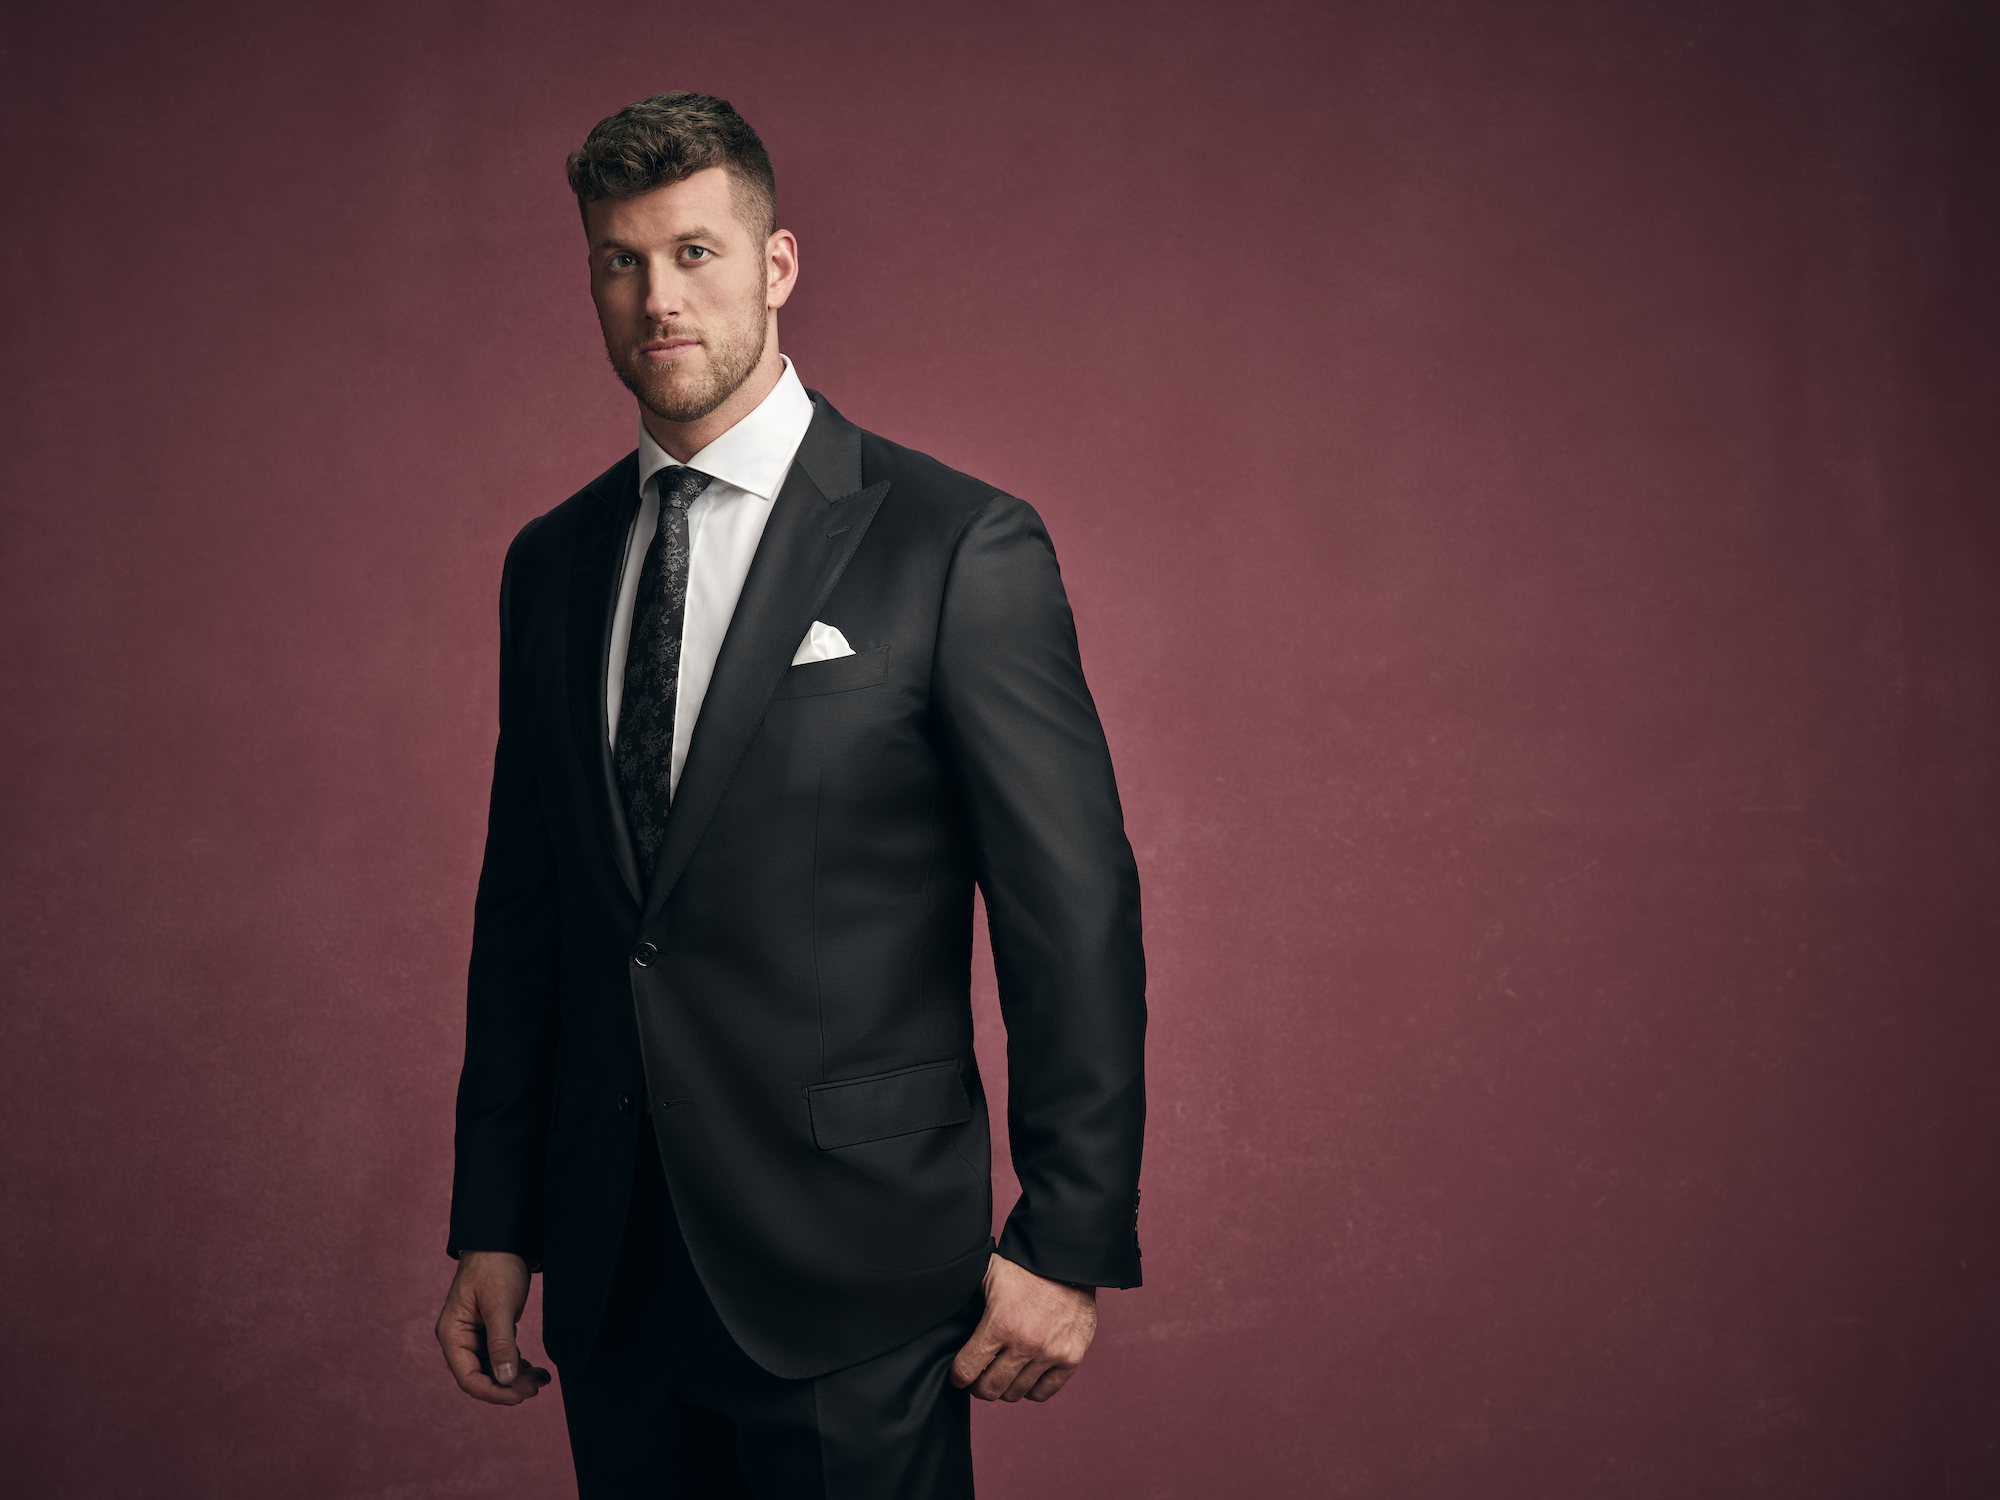 'The Bachelor' finale stars Clayton Echard, seen here wearing a suit, as he makes his final decision.